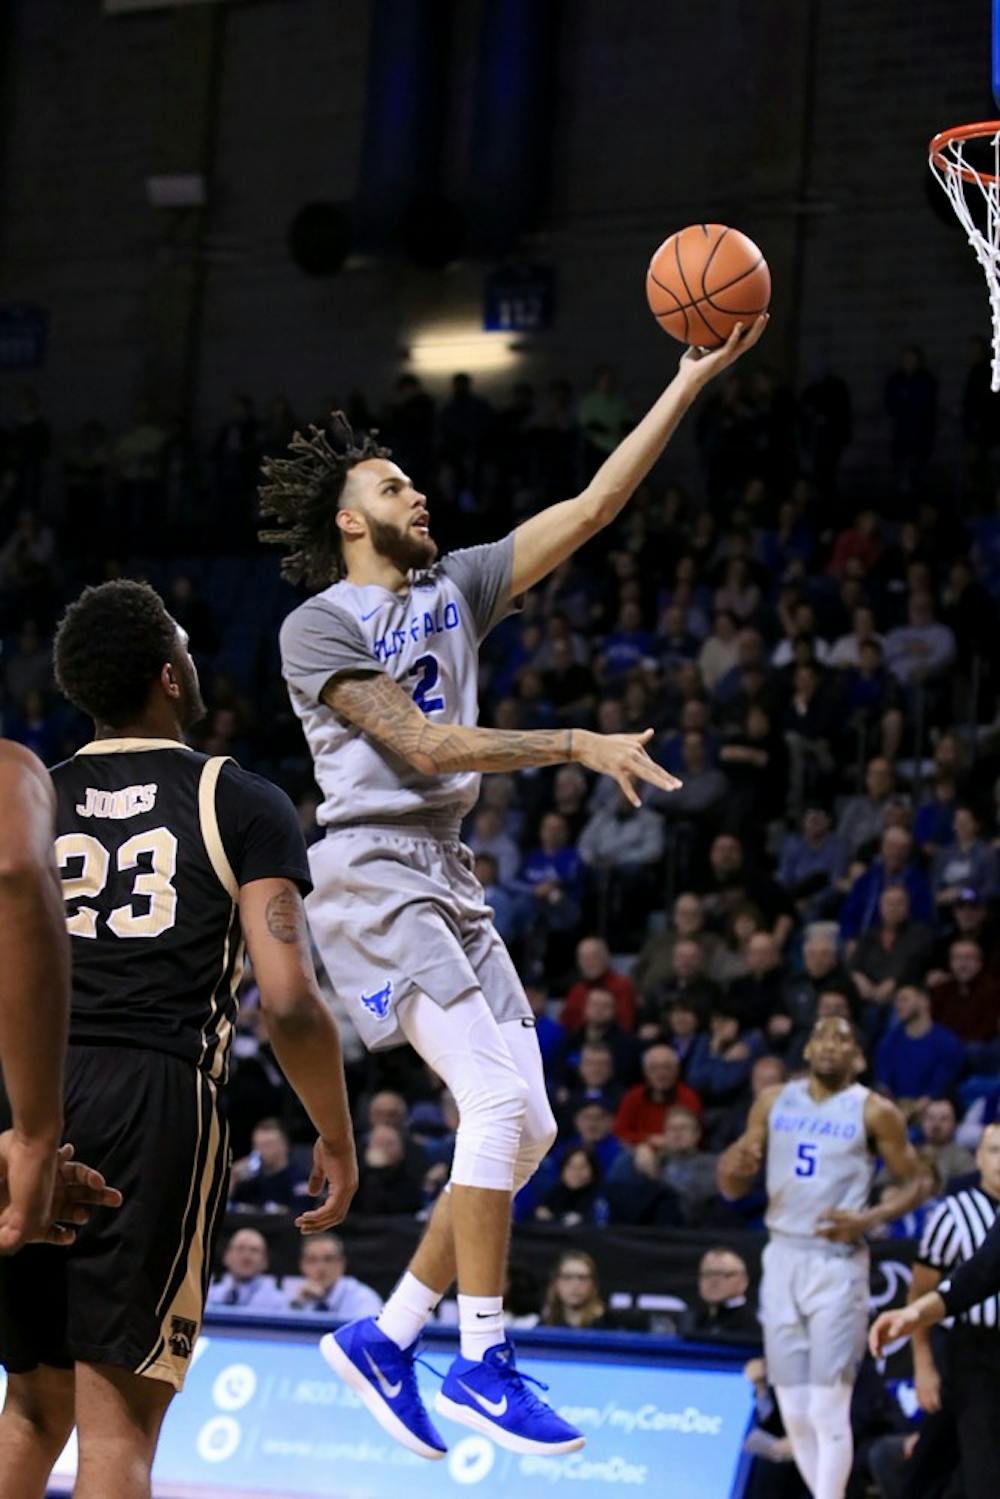 <p>Junior guard Jeremy Harris goes up for a layup. Harris has been a huge addition to the Bulls roster this season and is shooting 41.4 percent from three-point range.</p>